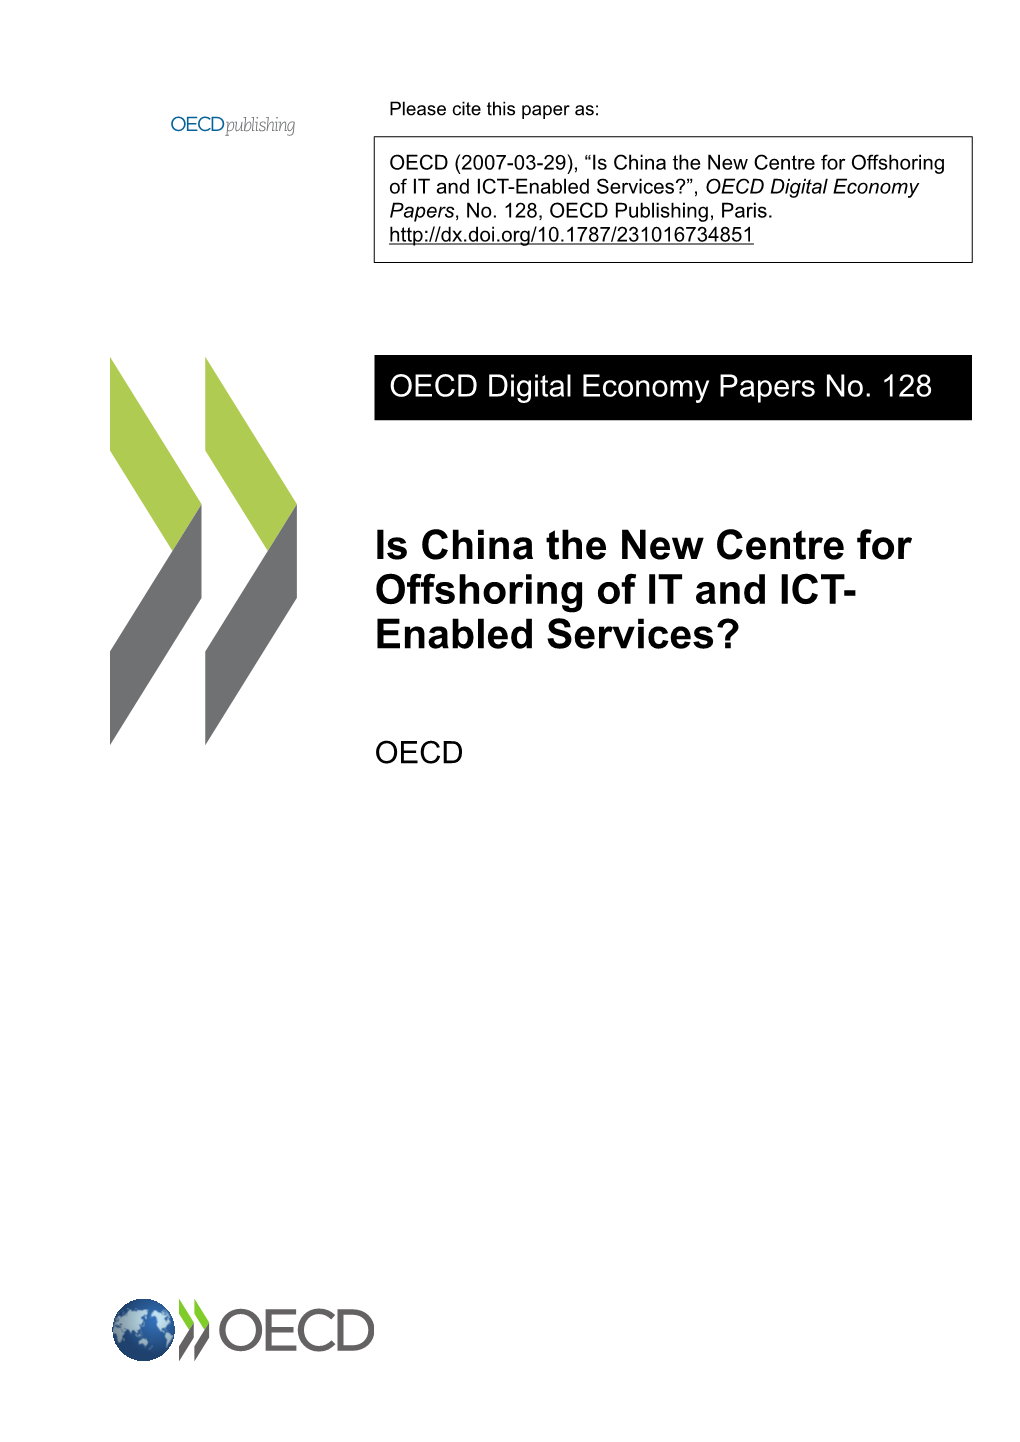 Is China the New Centre for Offshoring of IT and ICT- Enabled Services?